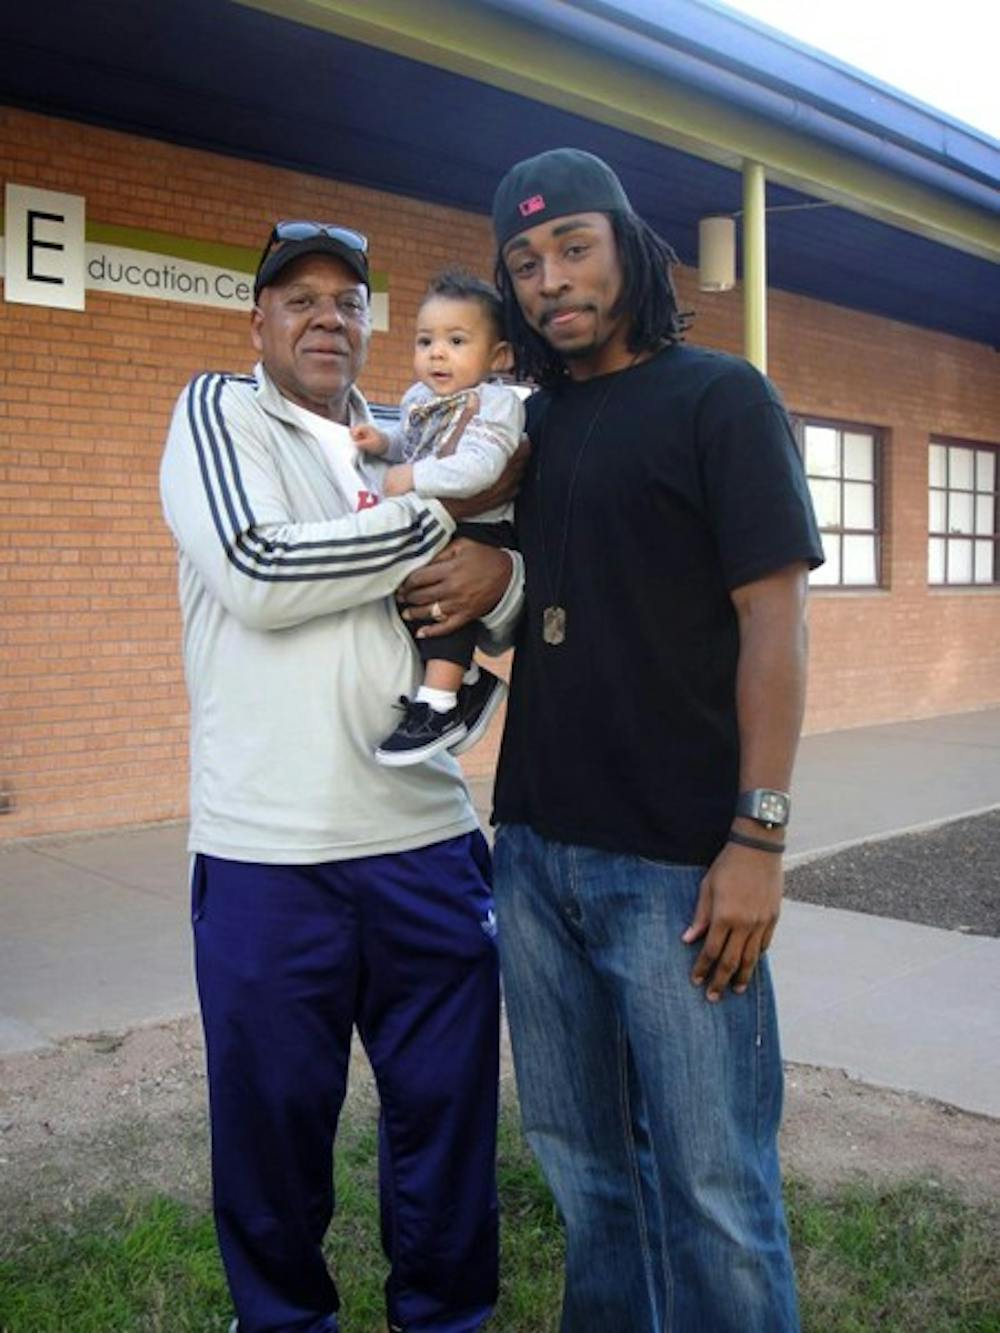 Tyrice Thompson (right) with his son Takai and his father Richard. Tyrice, a former ASU football player, died on Feb. 2 after being attacked while working as a bouncer at Martini Ranch in Scottsdale. (Photo Courtesy of Kathy Starr)